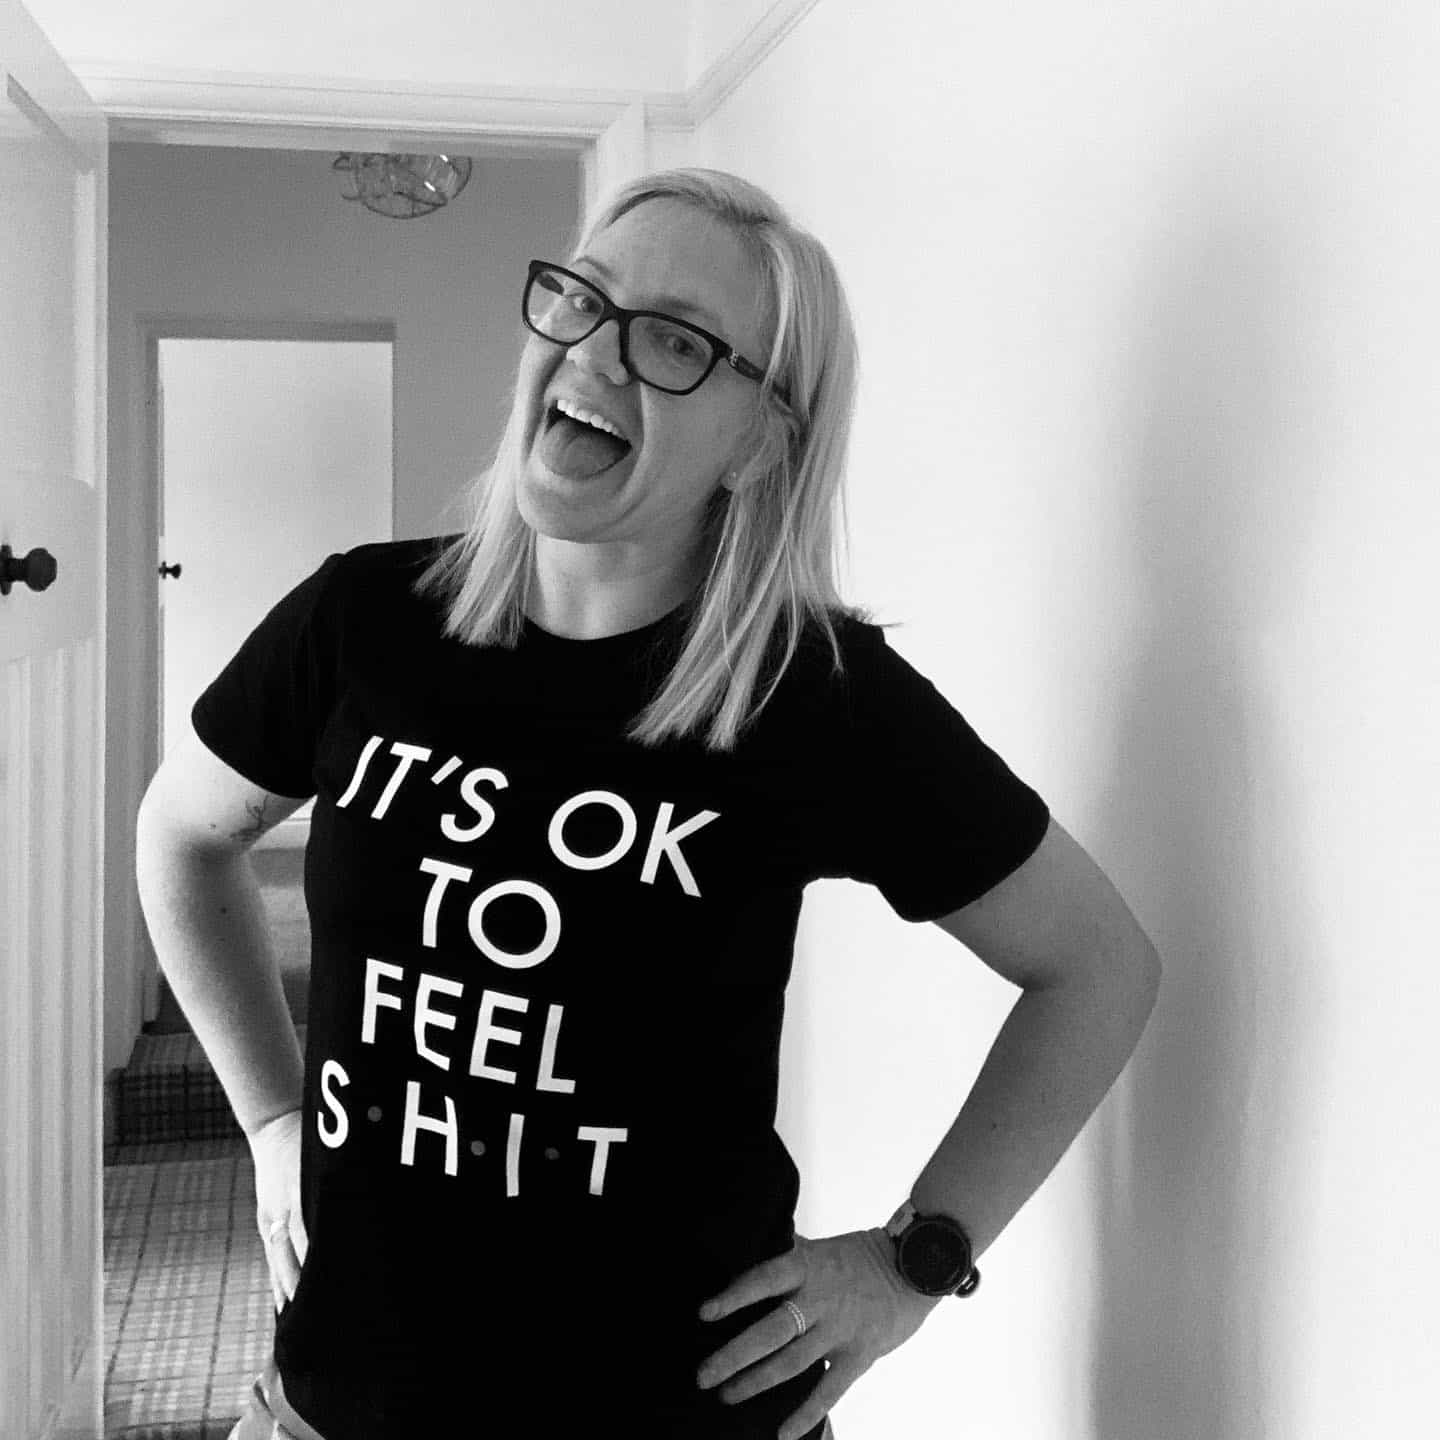 Tina in a t shirt that says it is ok to feel sh*t